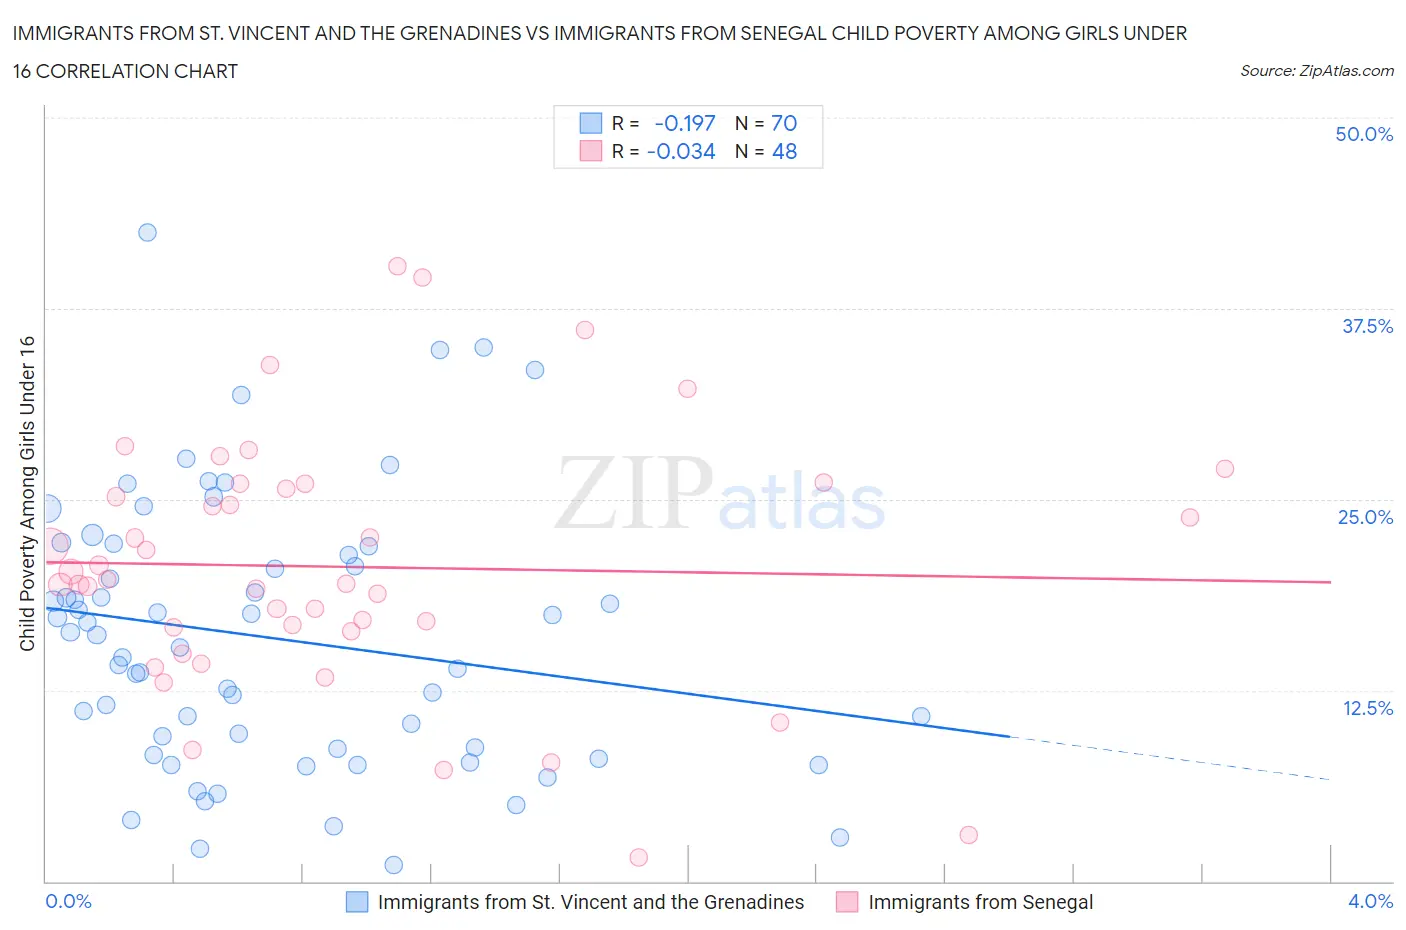 Immigrants from St. Vincent and the Grenadines vs Immigrants from Senegal Child Poverty Among Girls Under 16